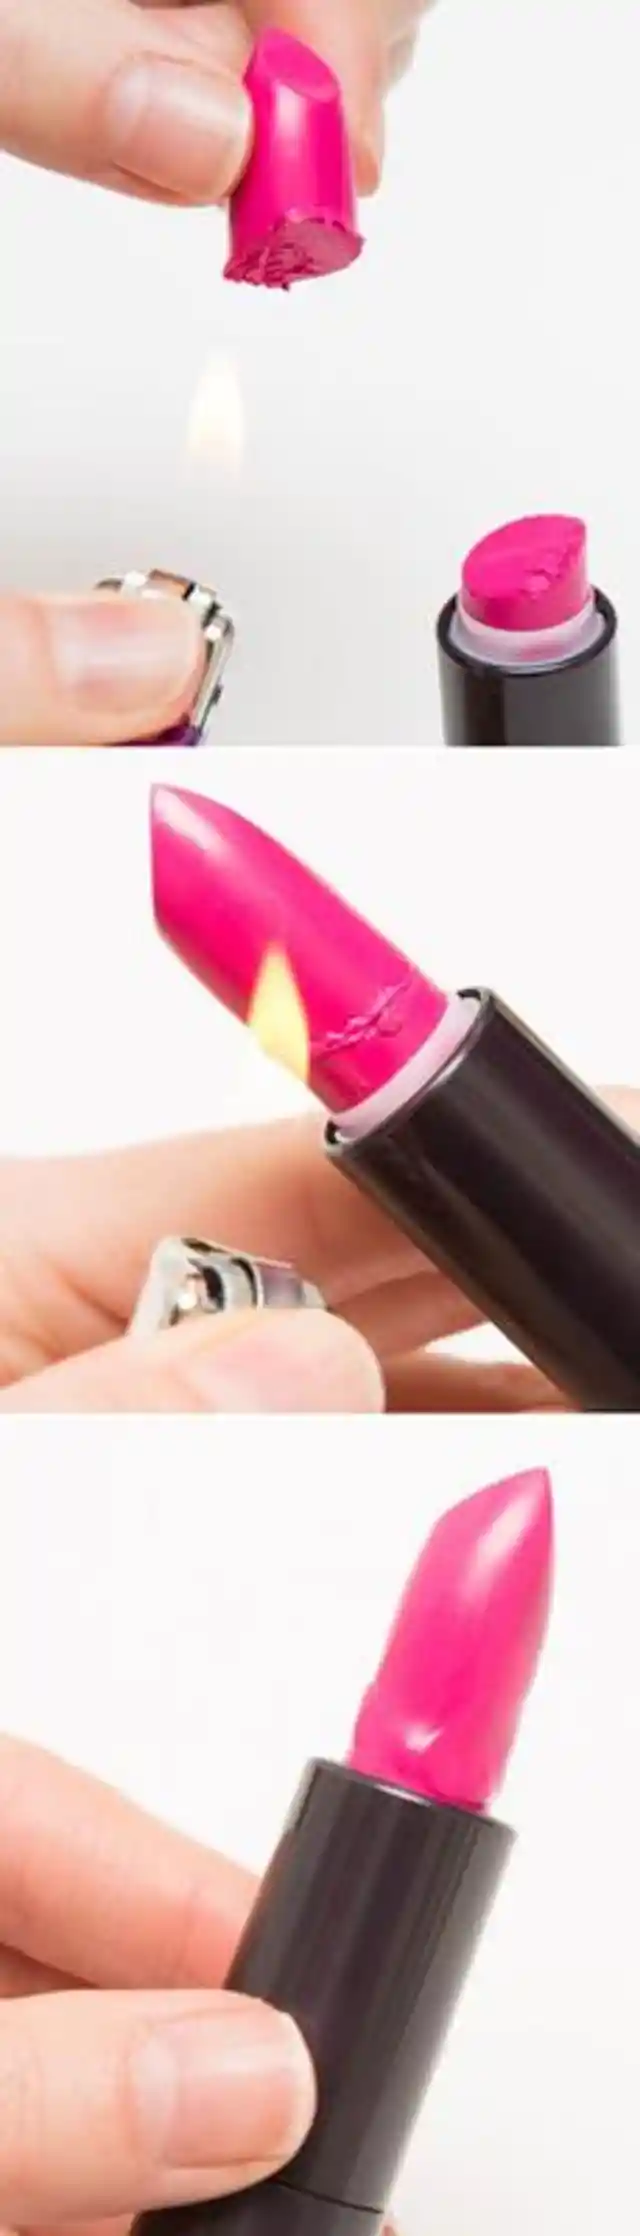 6. Dab Powder On Tissue Over Your Lips To Help Lipstick Last Longer